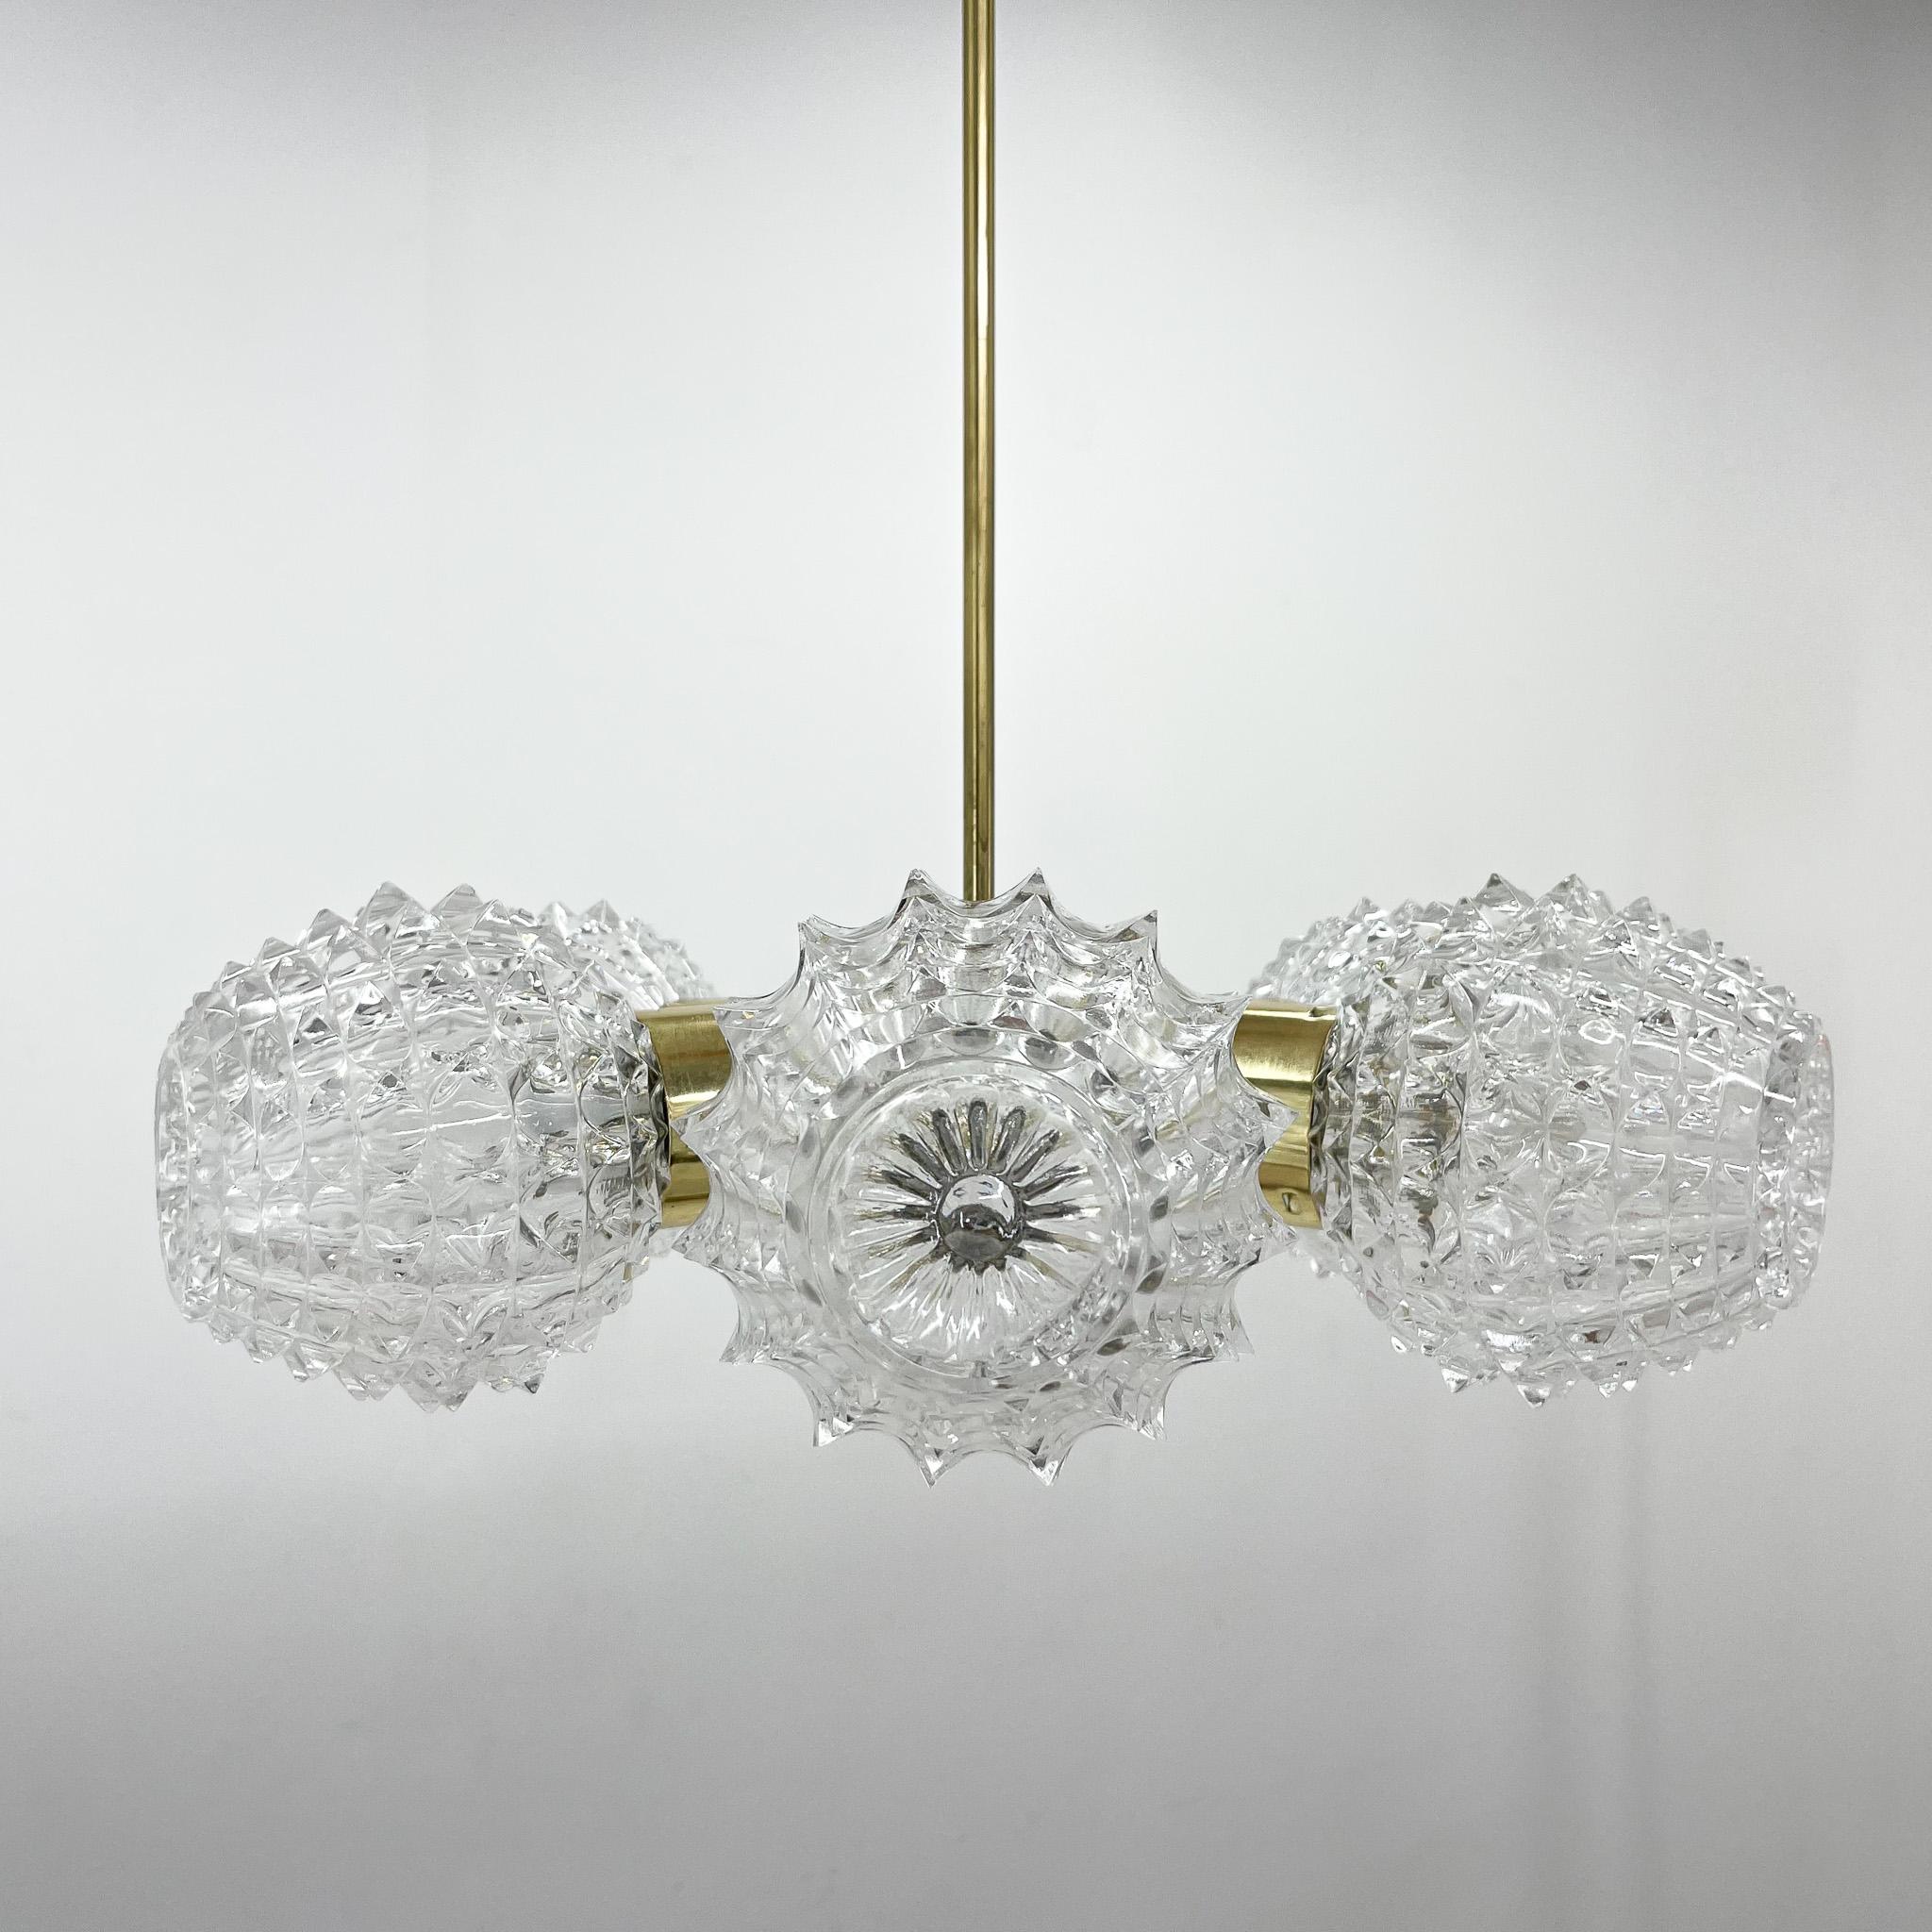 Mid-Century Modern 1960s Brass & Glass Chandelier by Kamenicky Senov, 2 Pieces Available For Sale